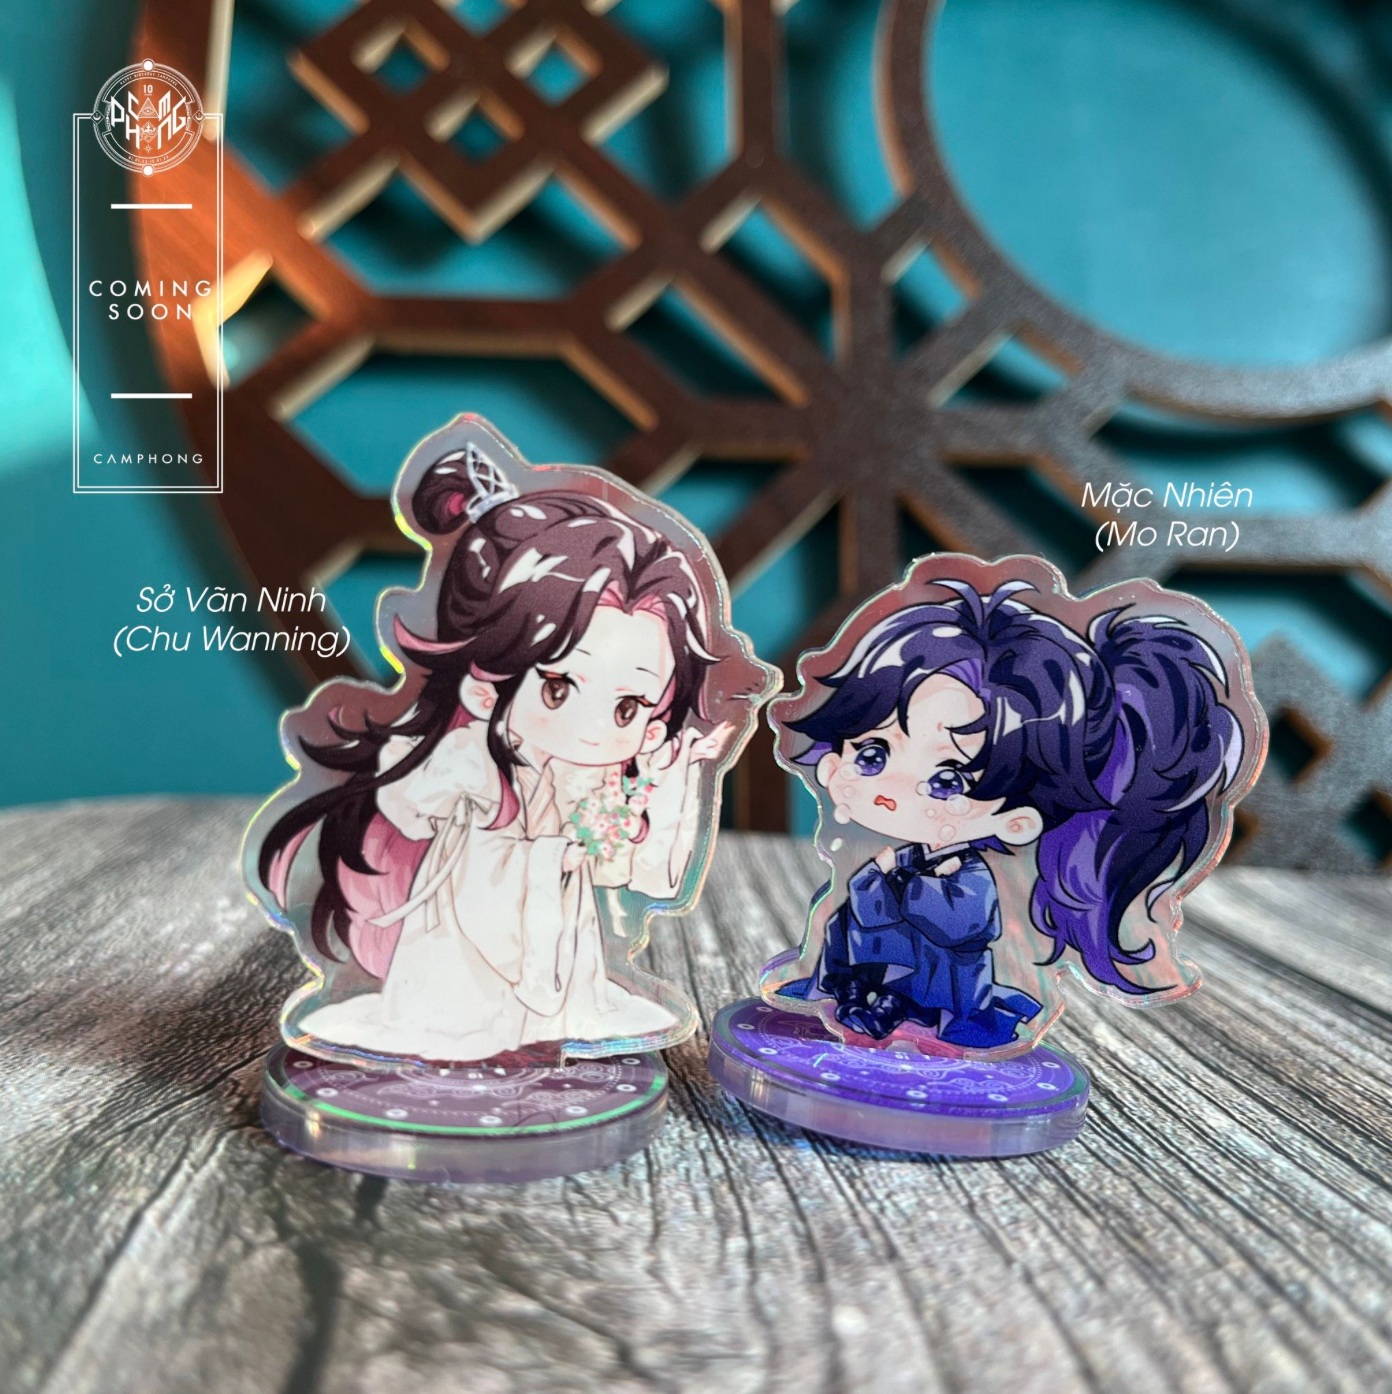 The Husky and His White Cat : Chibi Bitrhday Standee & Badge Set